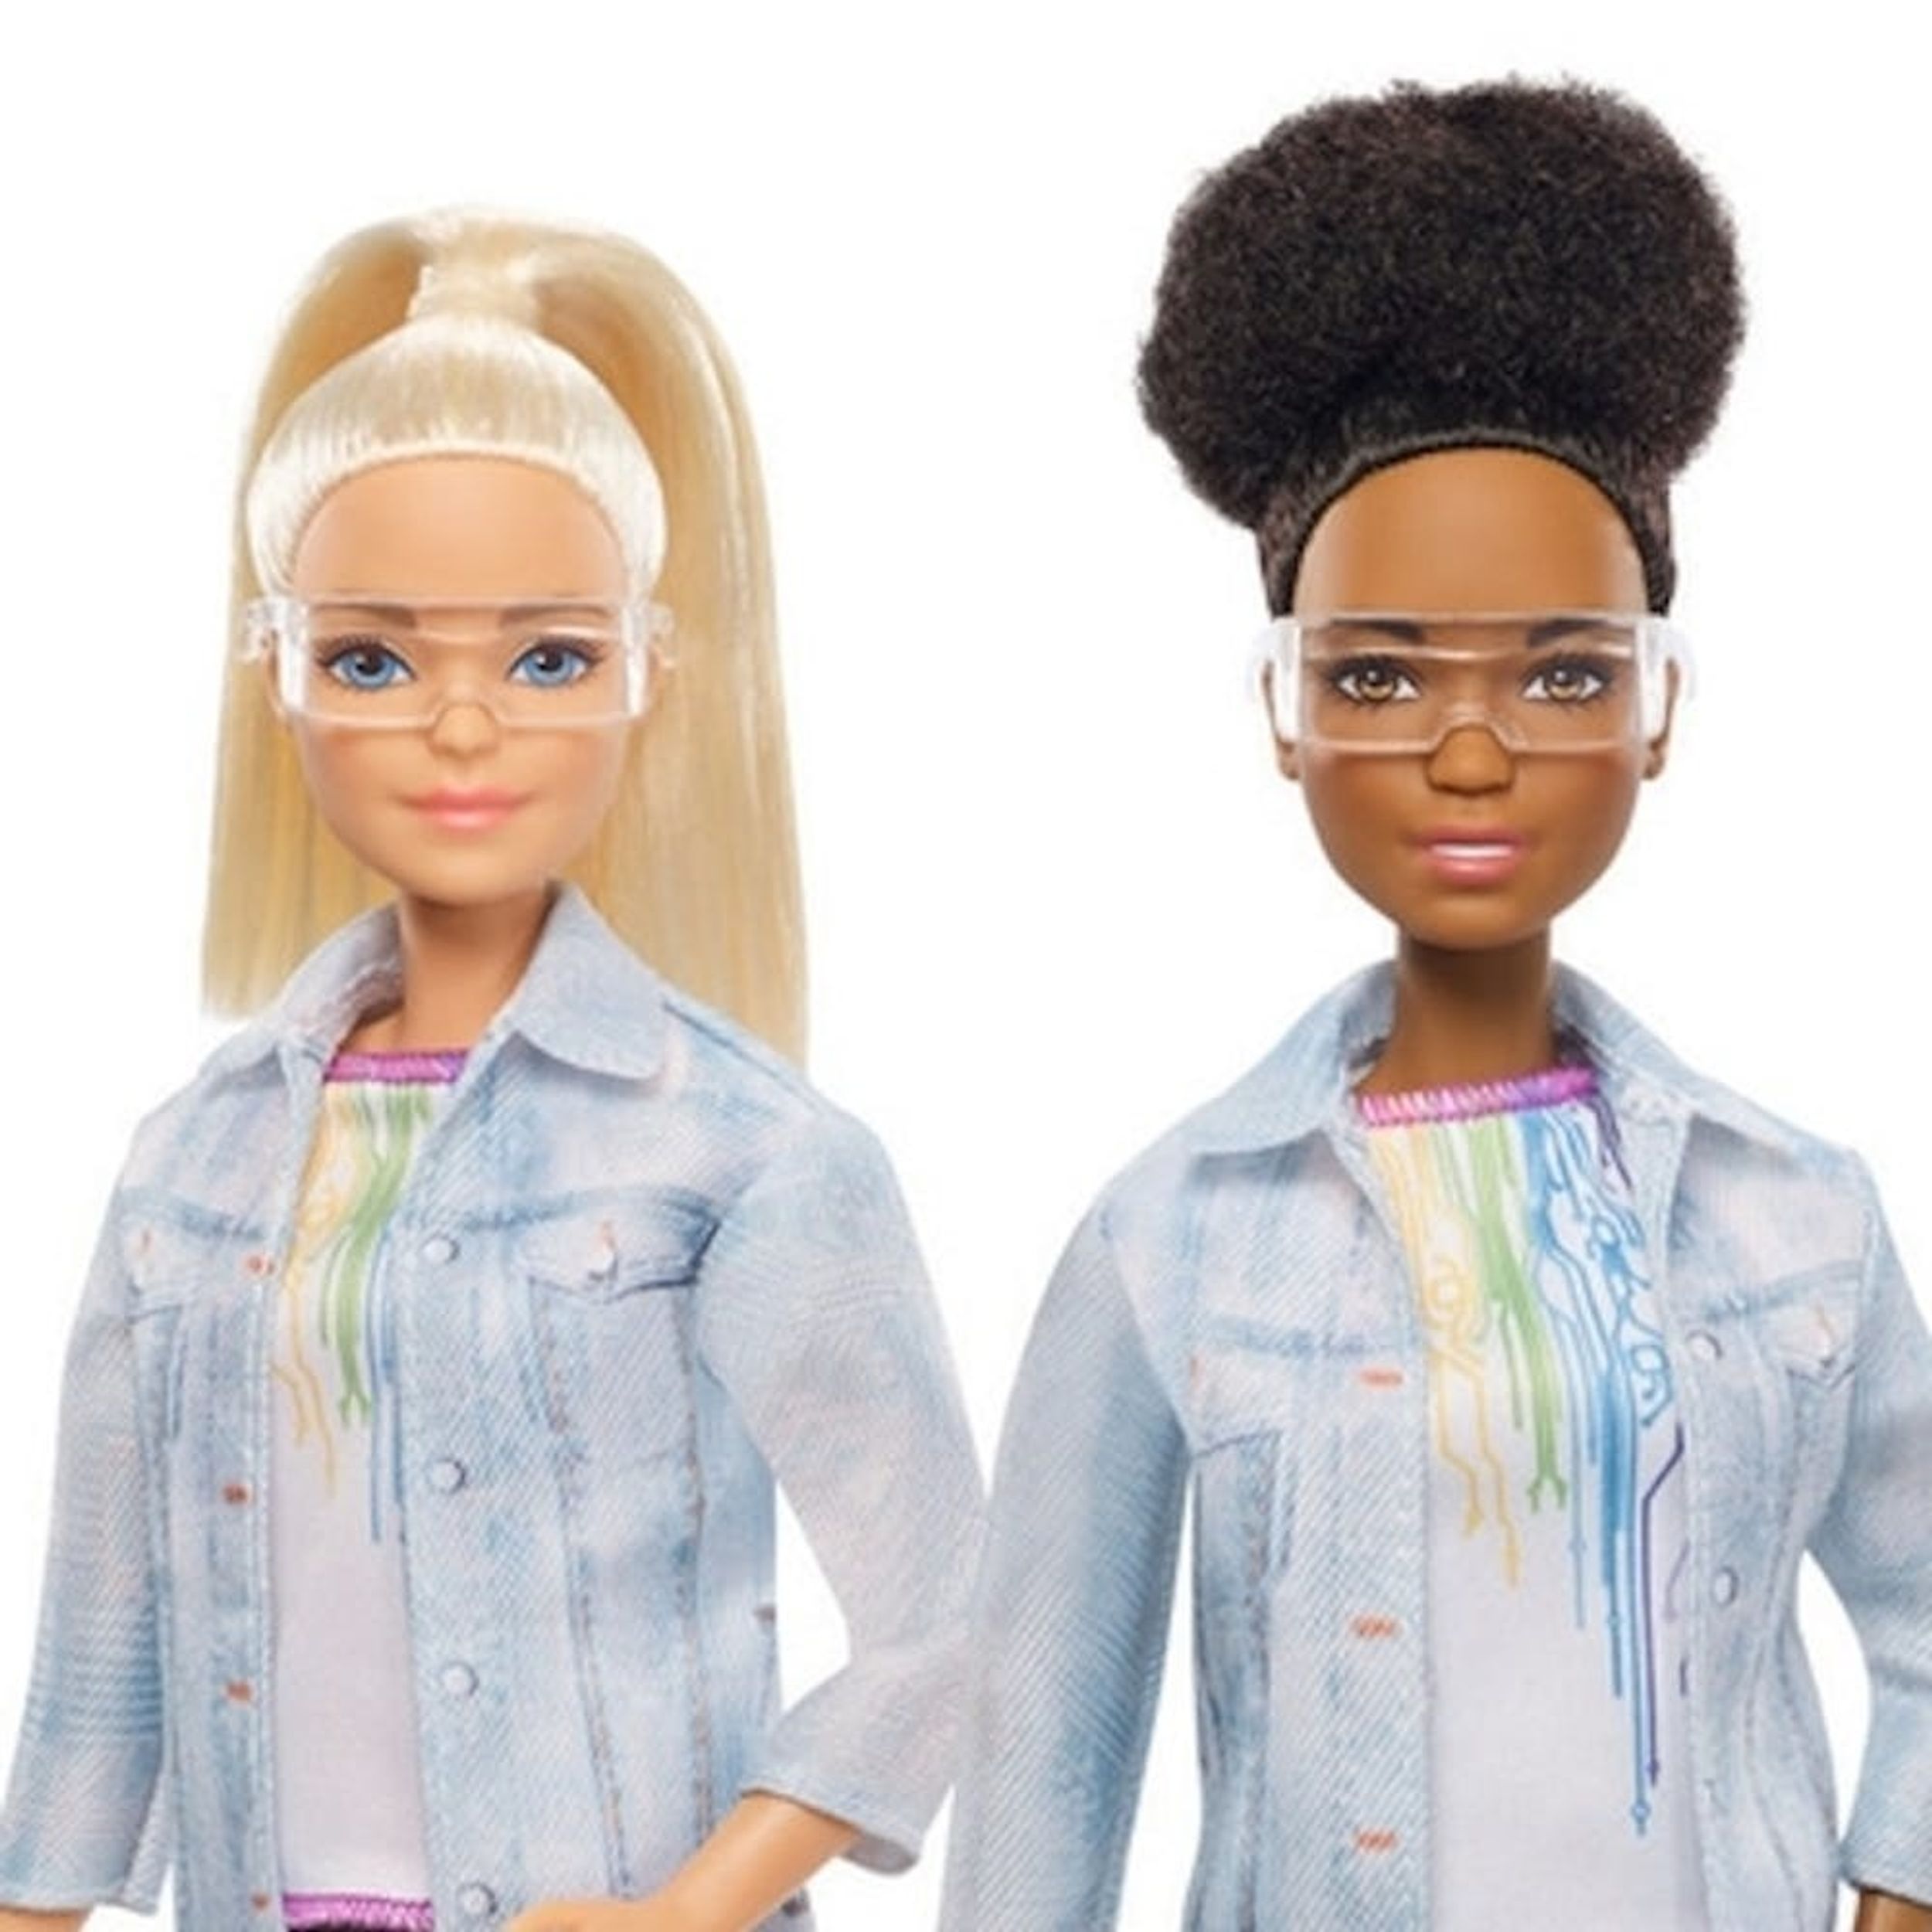 Barbie Wants to Teach Girls to Code With Its New ‘Career of the Year’ Doll